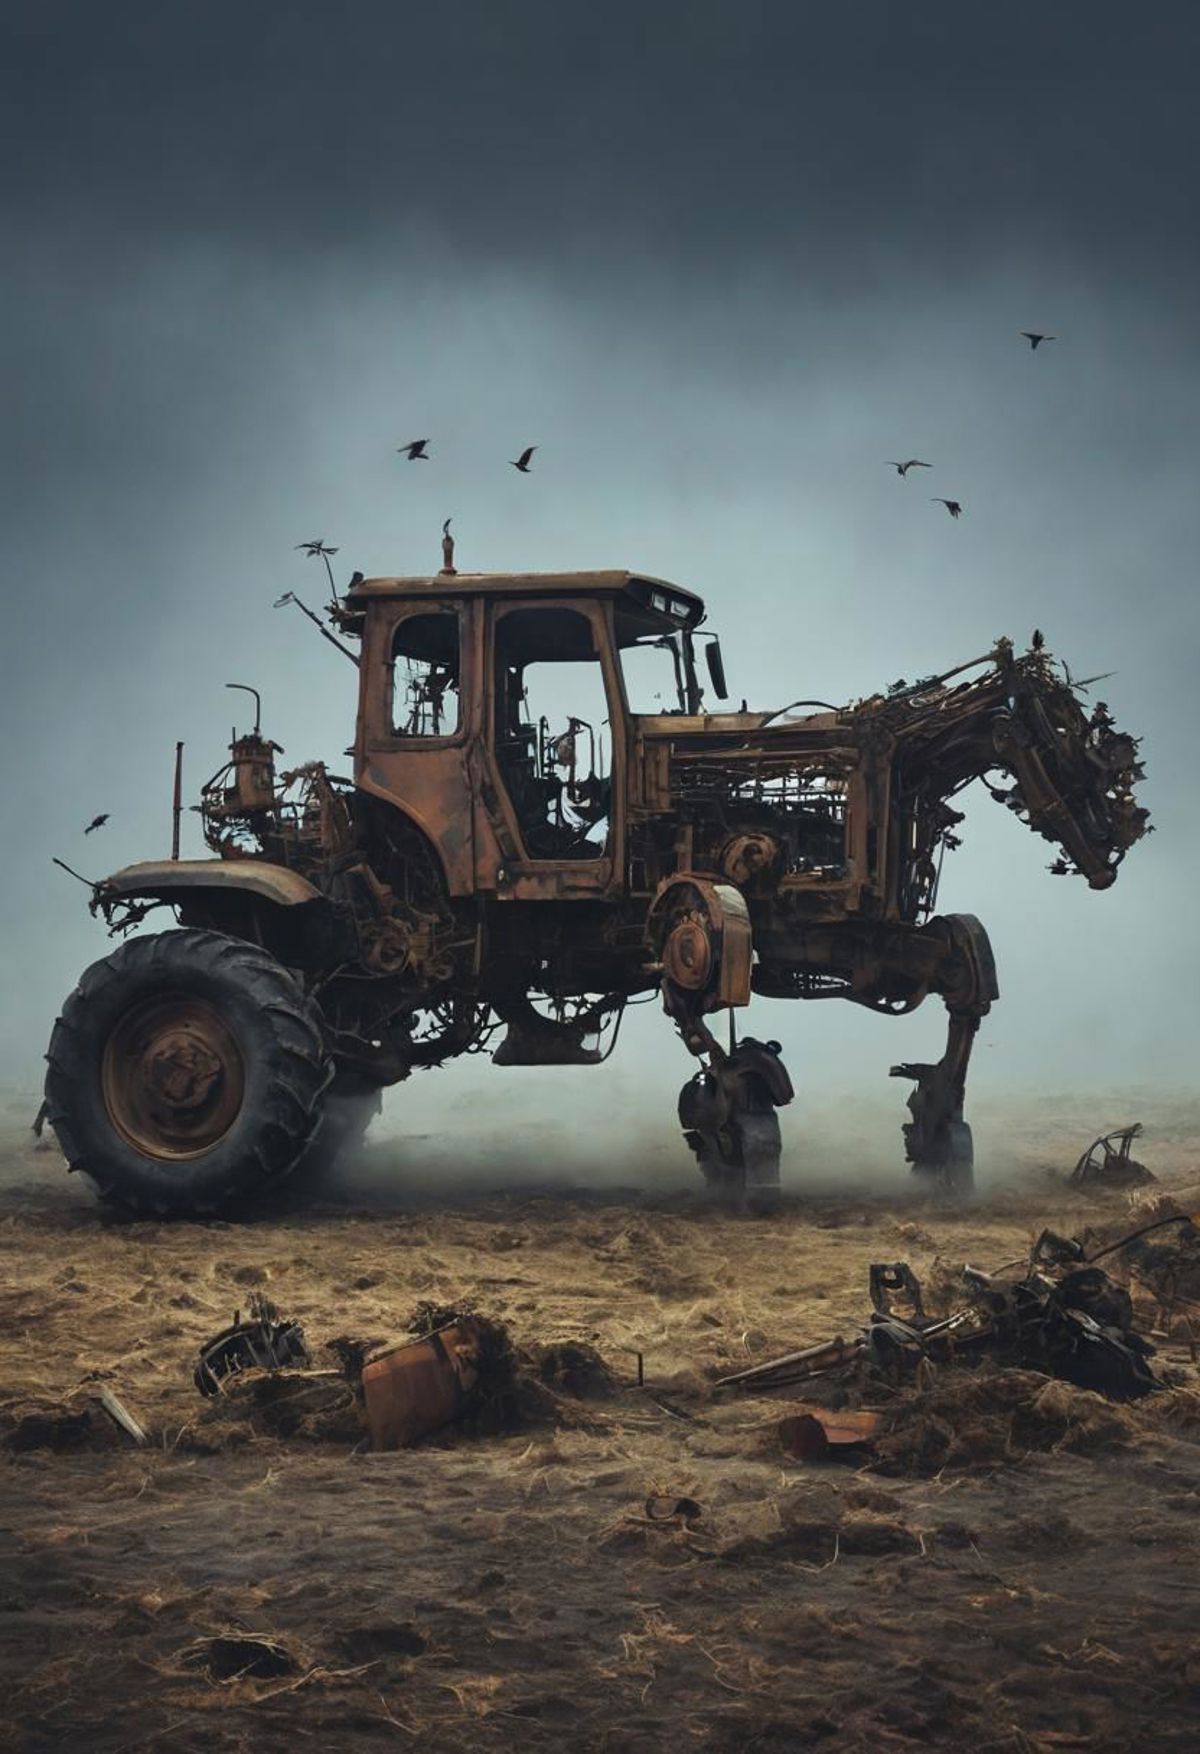 A rusty tractor with a horse head on it, surrounded by birds and junk.